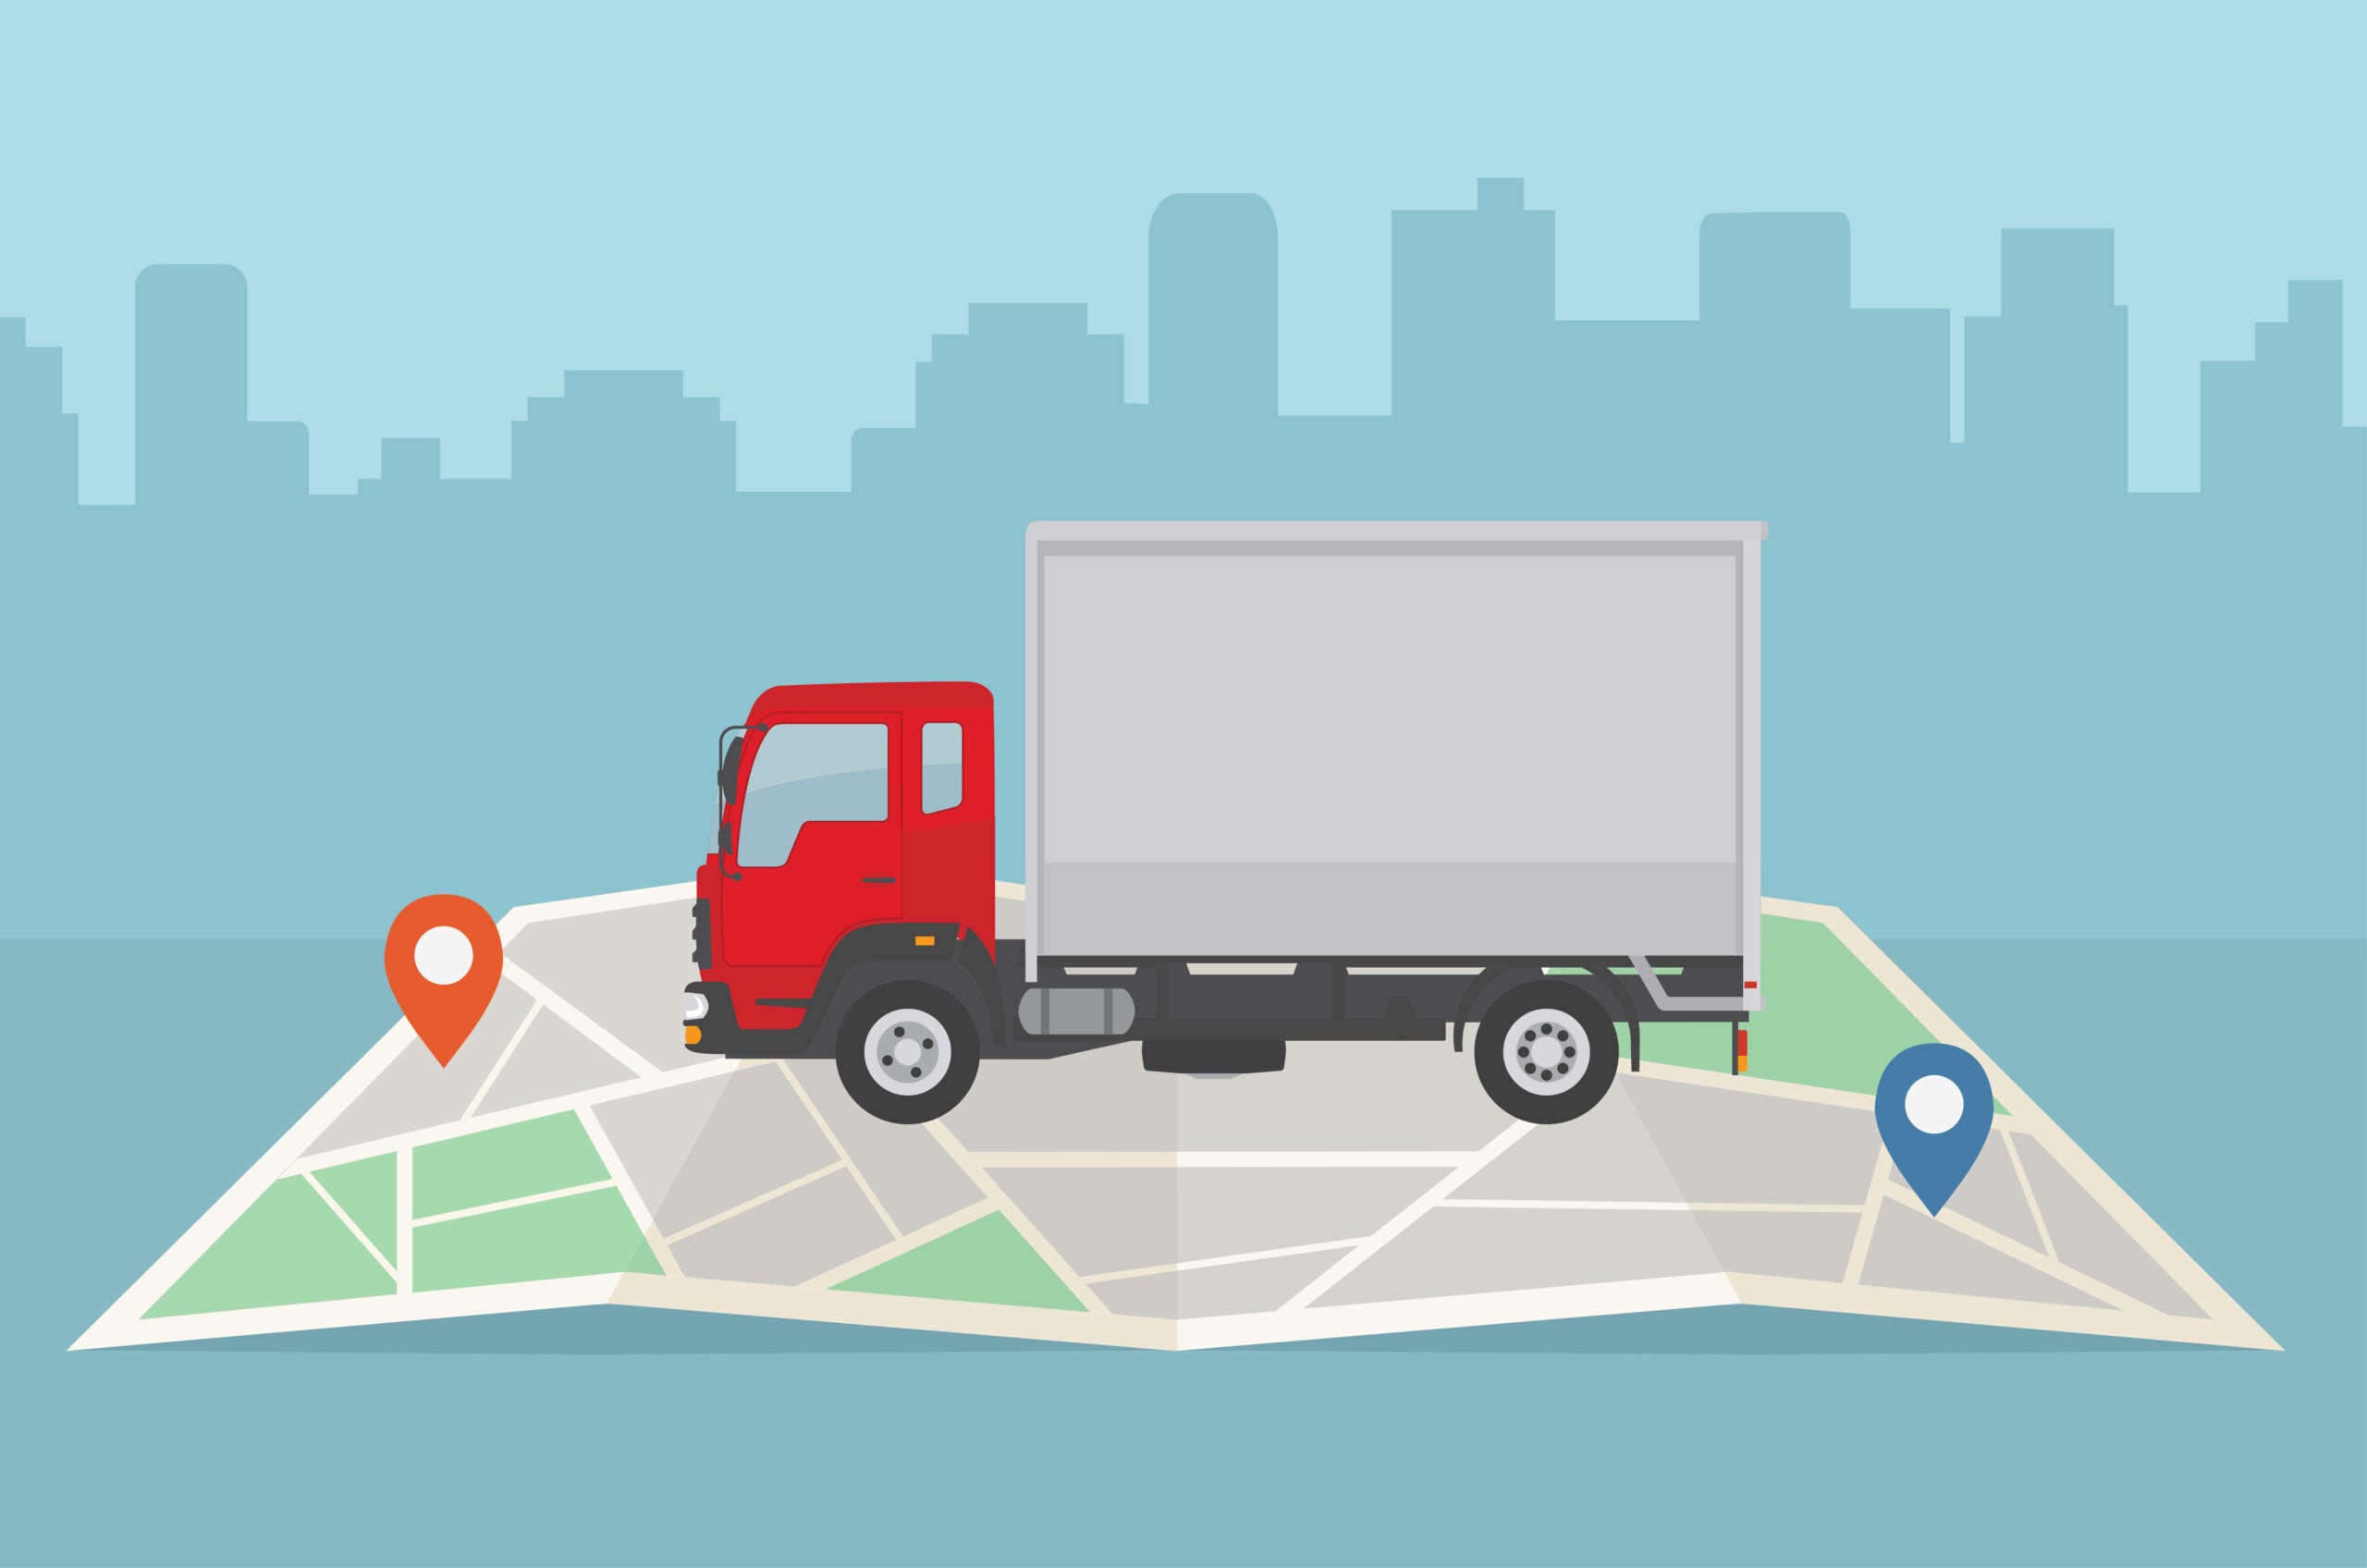 A moving truck with a red cab sits atop a map with the silhouette of a city in the background.